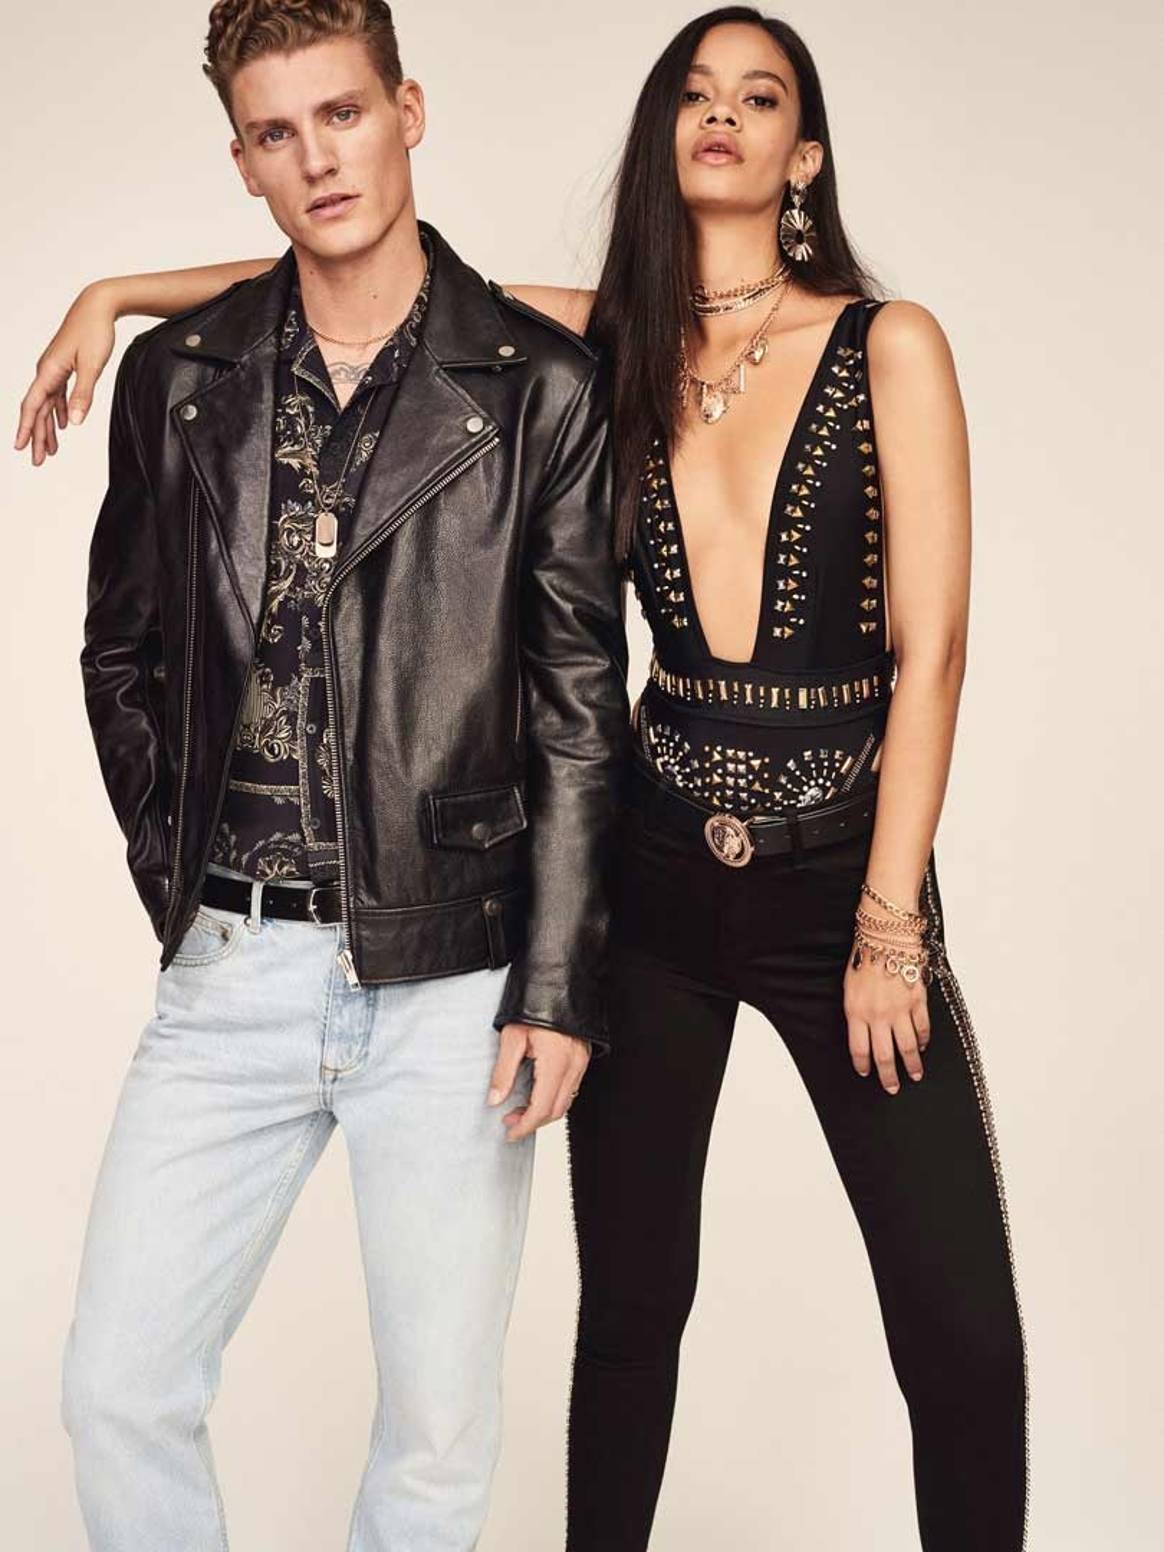 River Island launches 30th anniversary collection